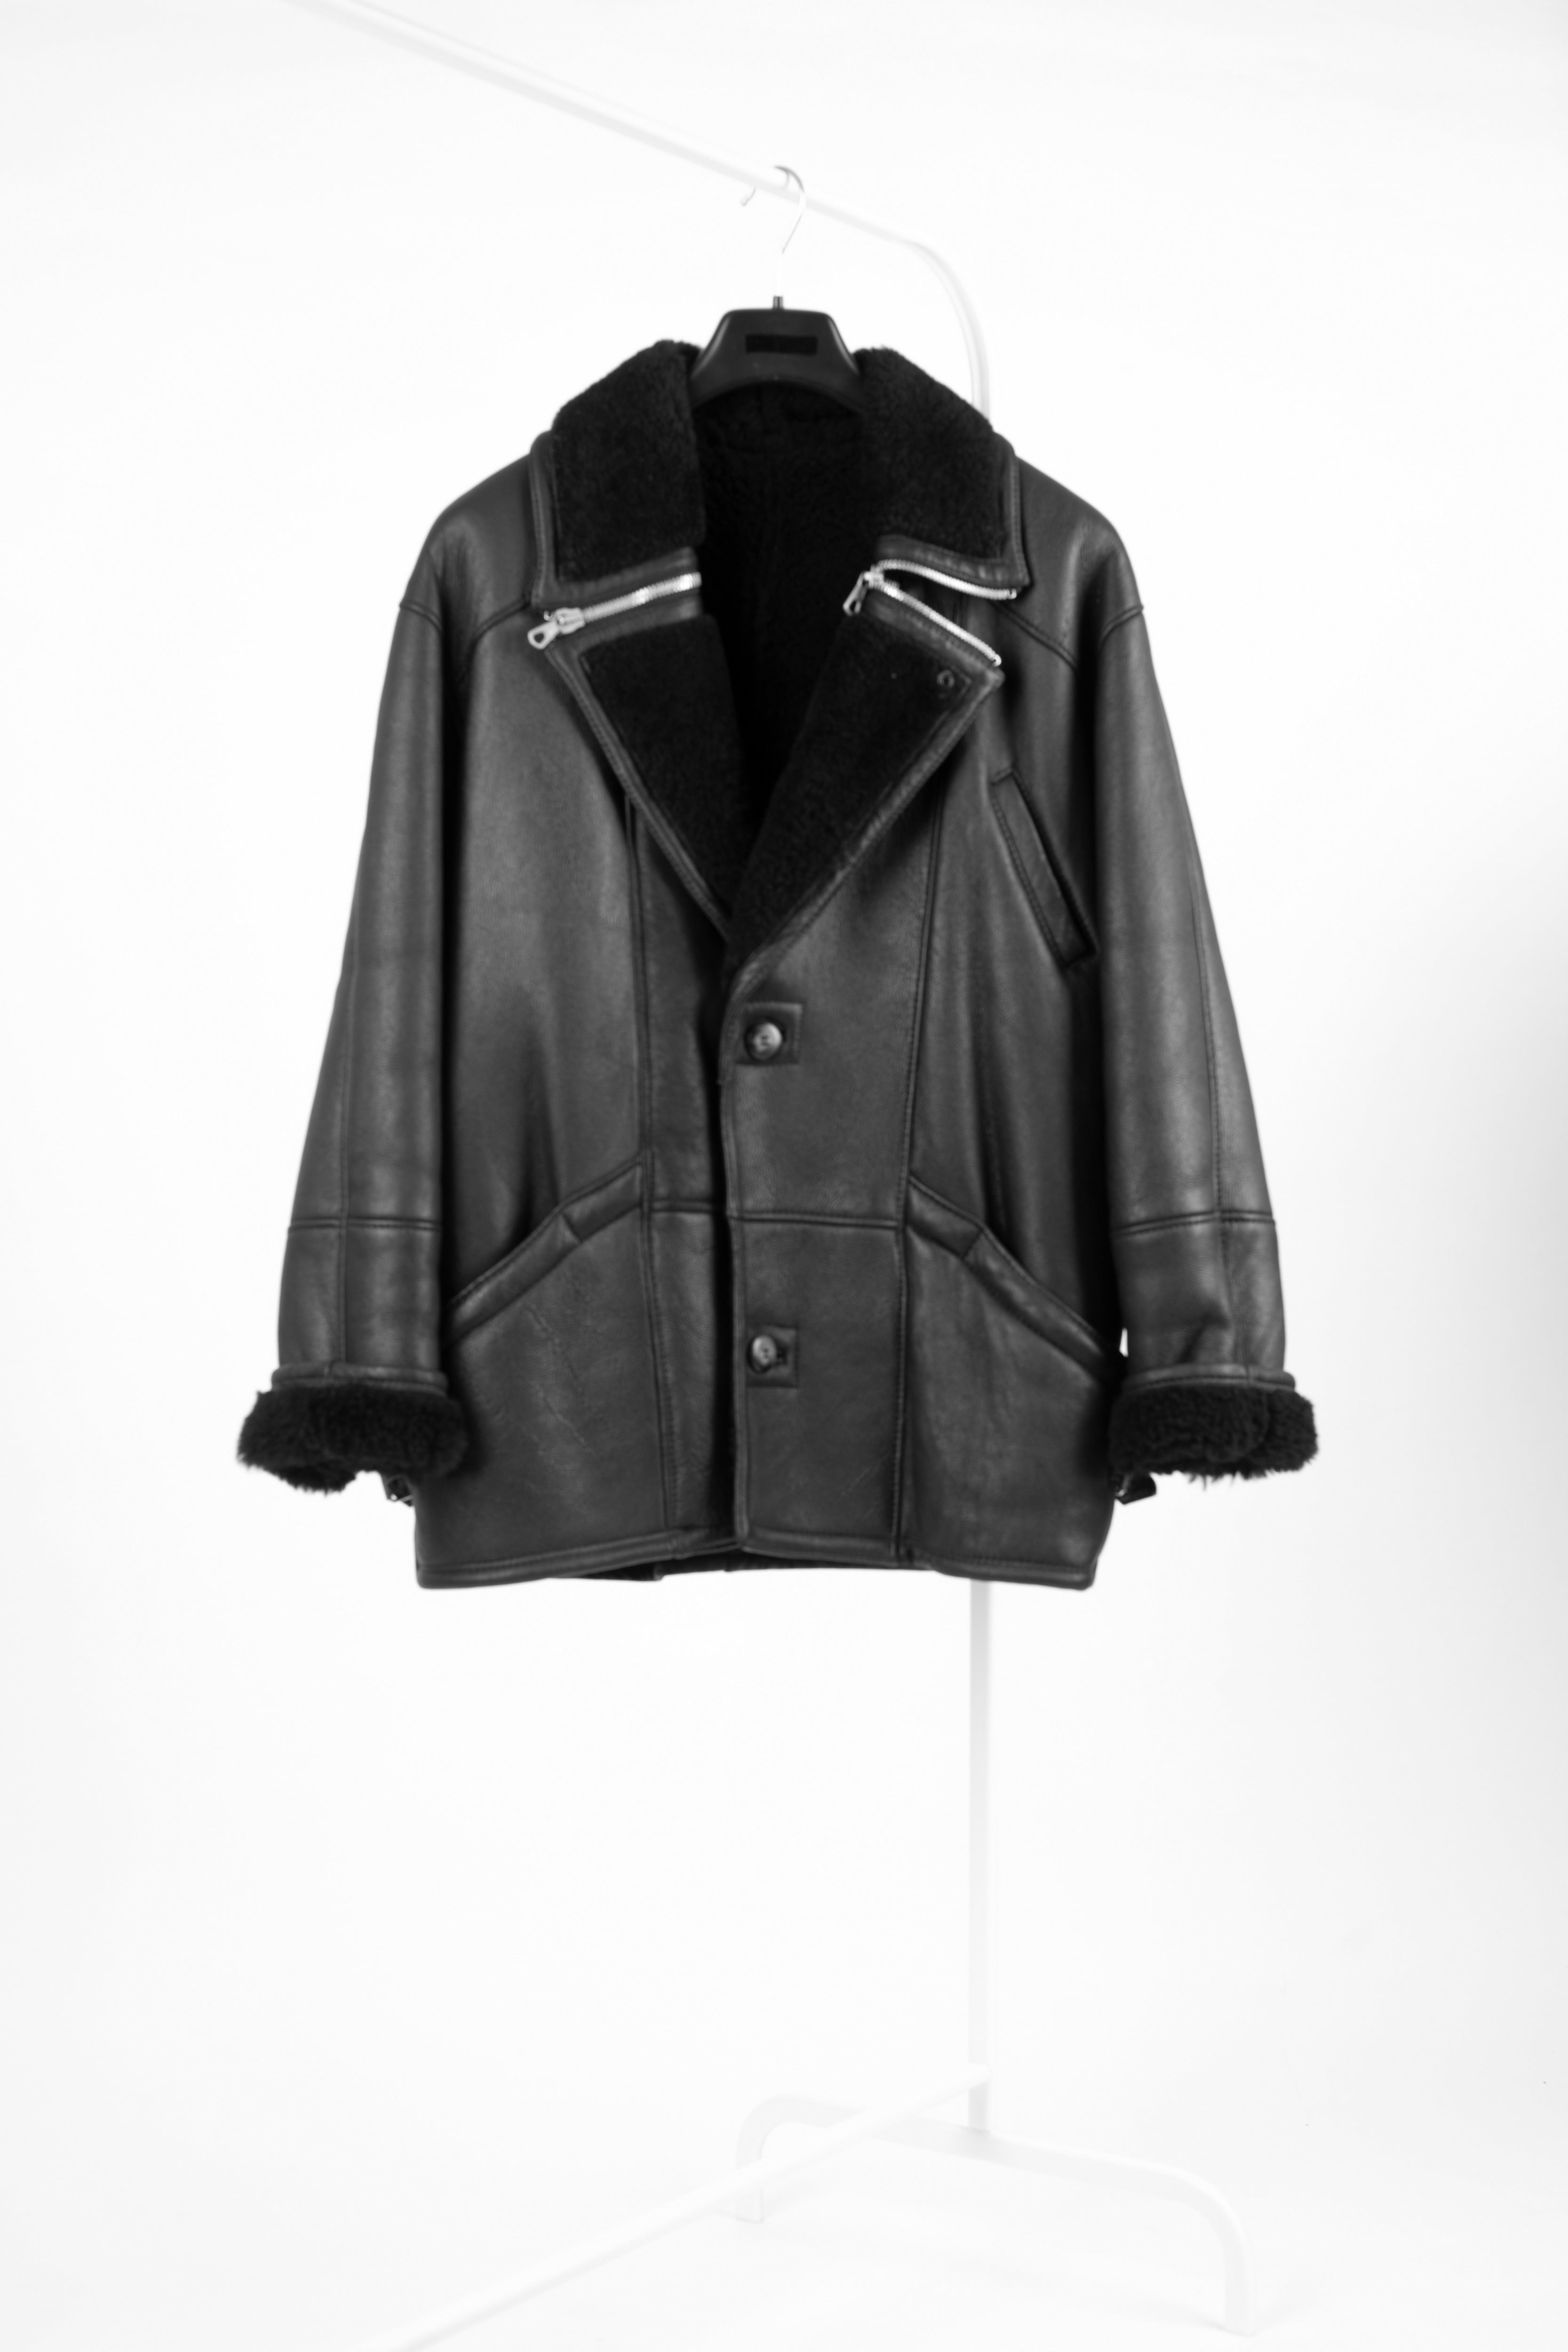 Black Motorcycle Style Shearling Jacket With Zipper Detail, men's EU 50, US 40